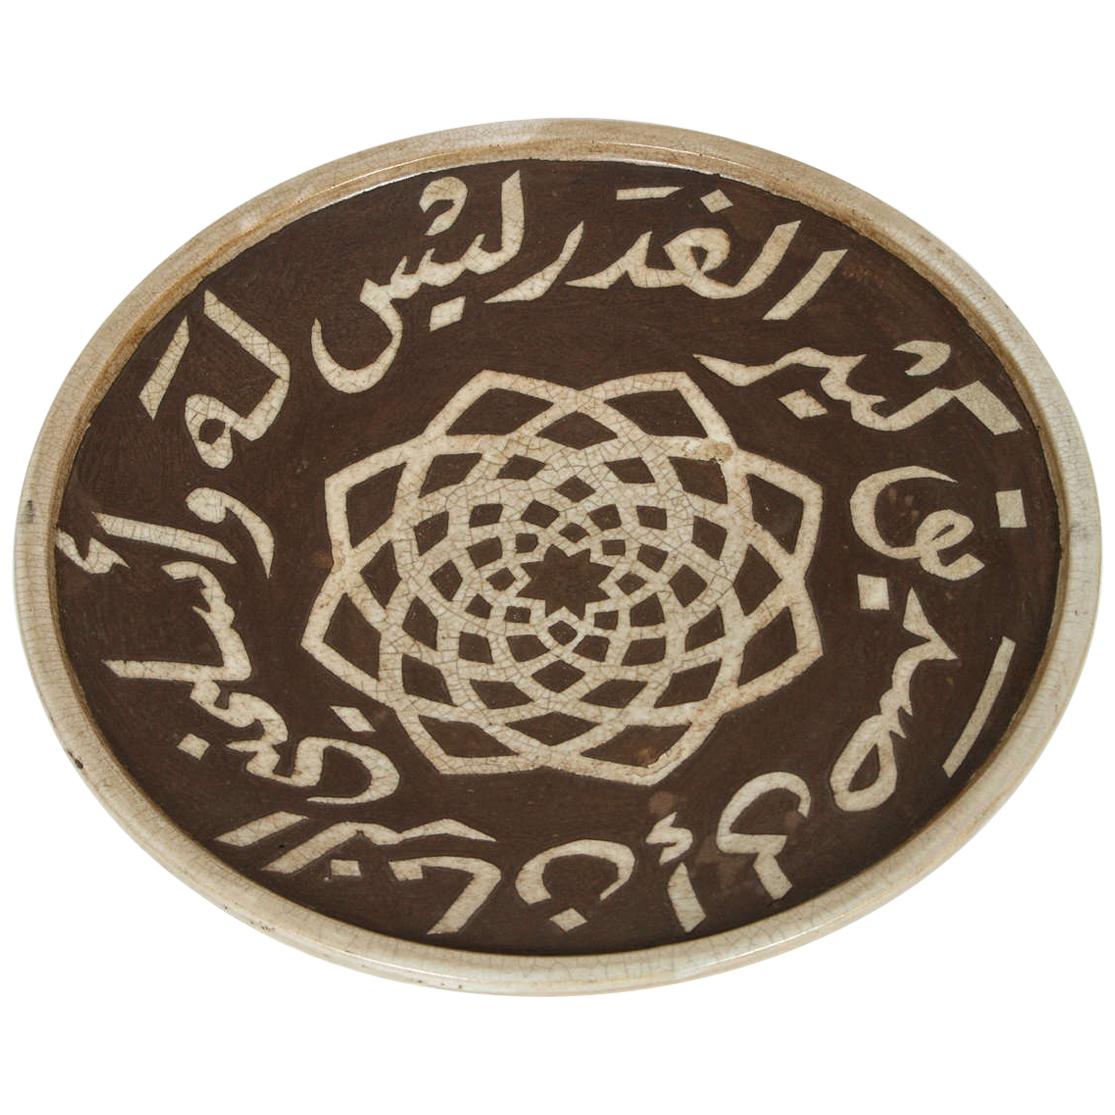 Moroccan Ceramic Brown Plate Chiseled with Arabic Calligraphy Scripts